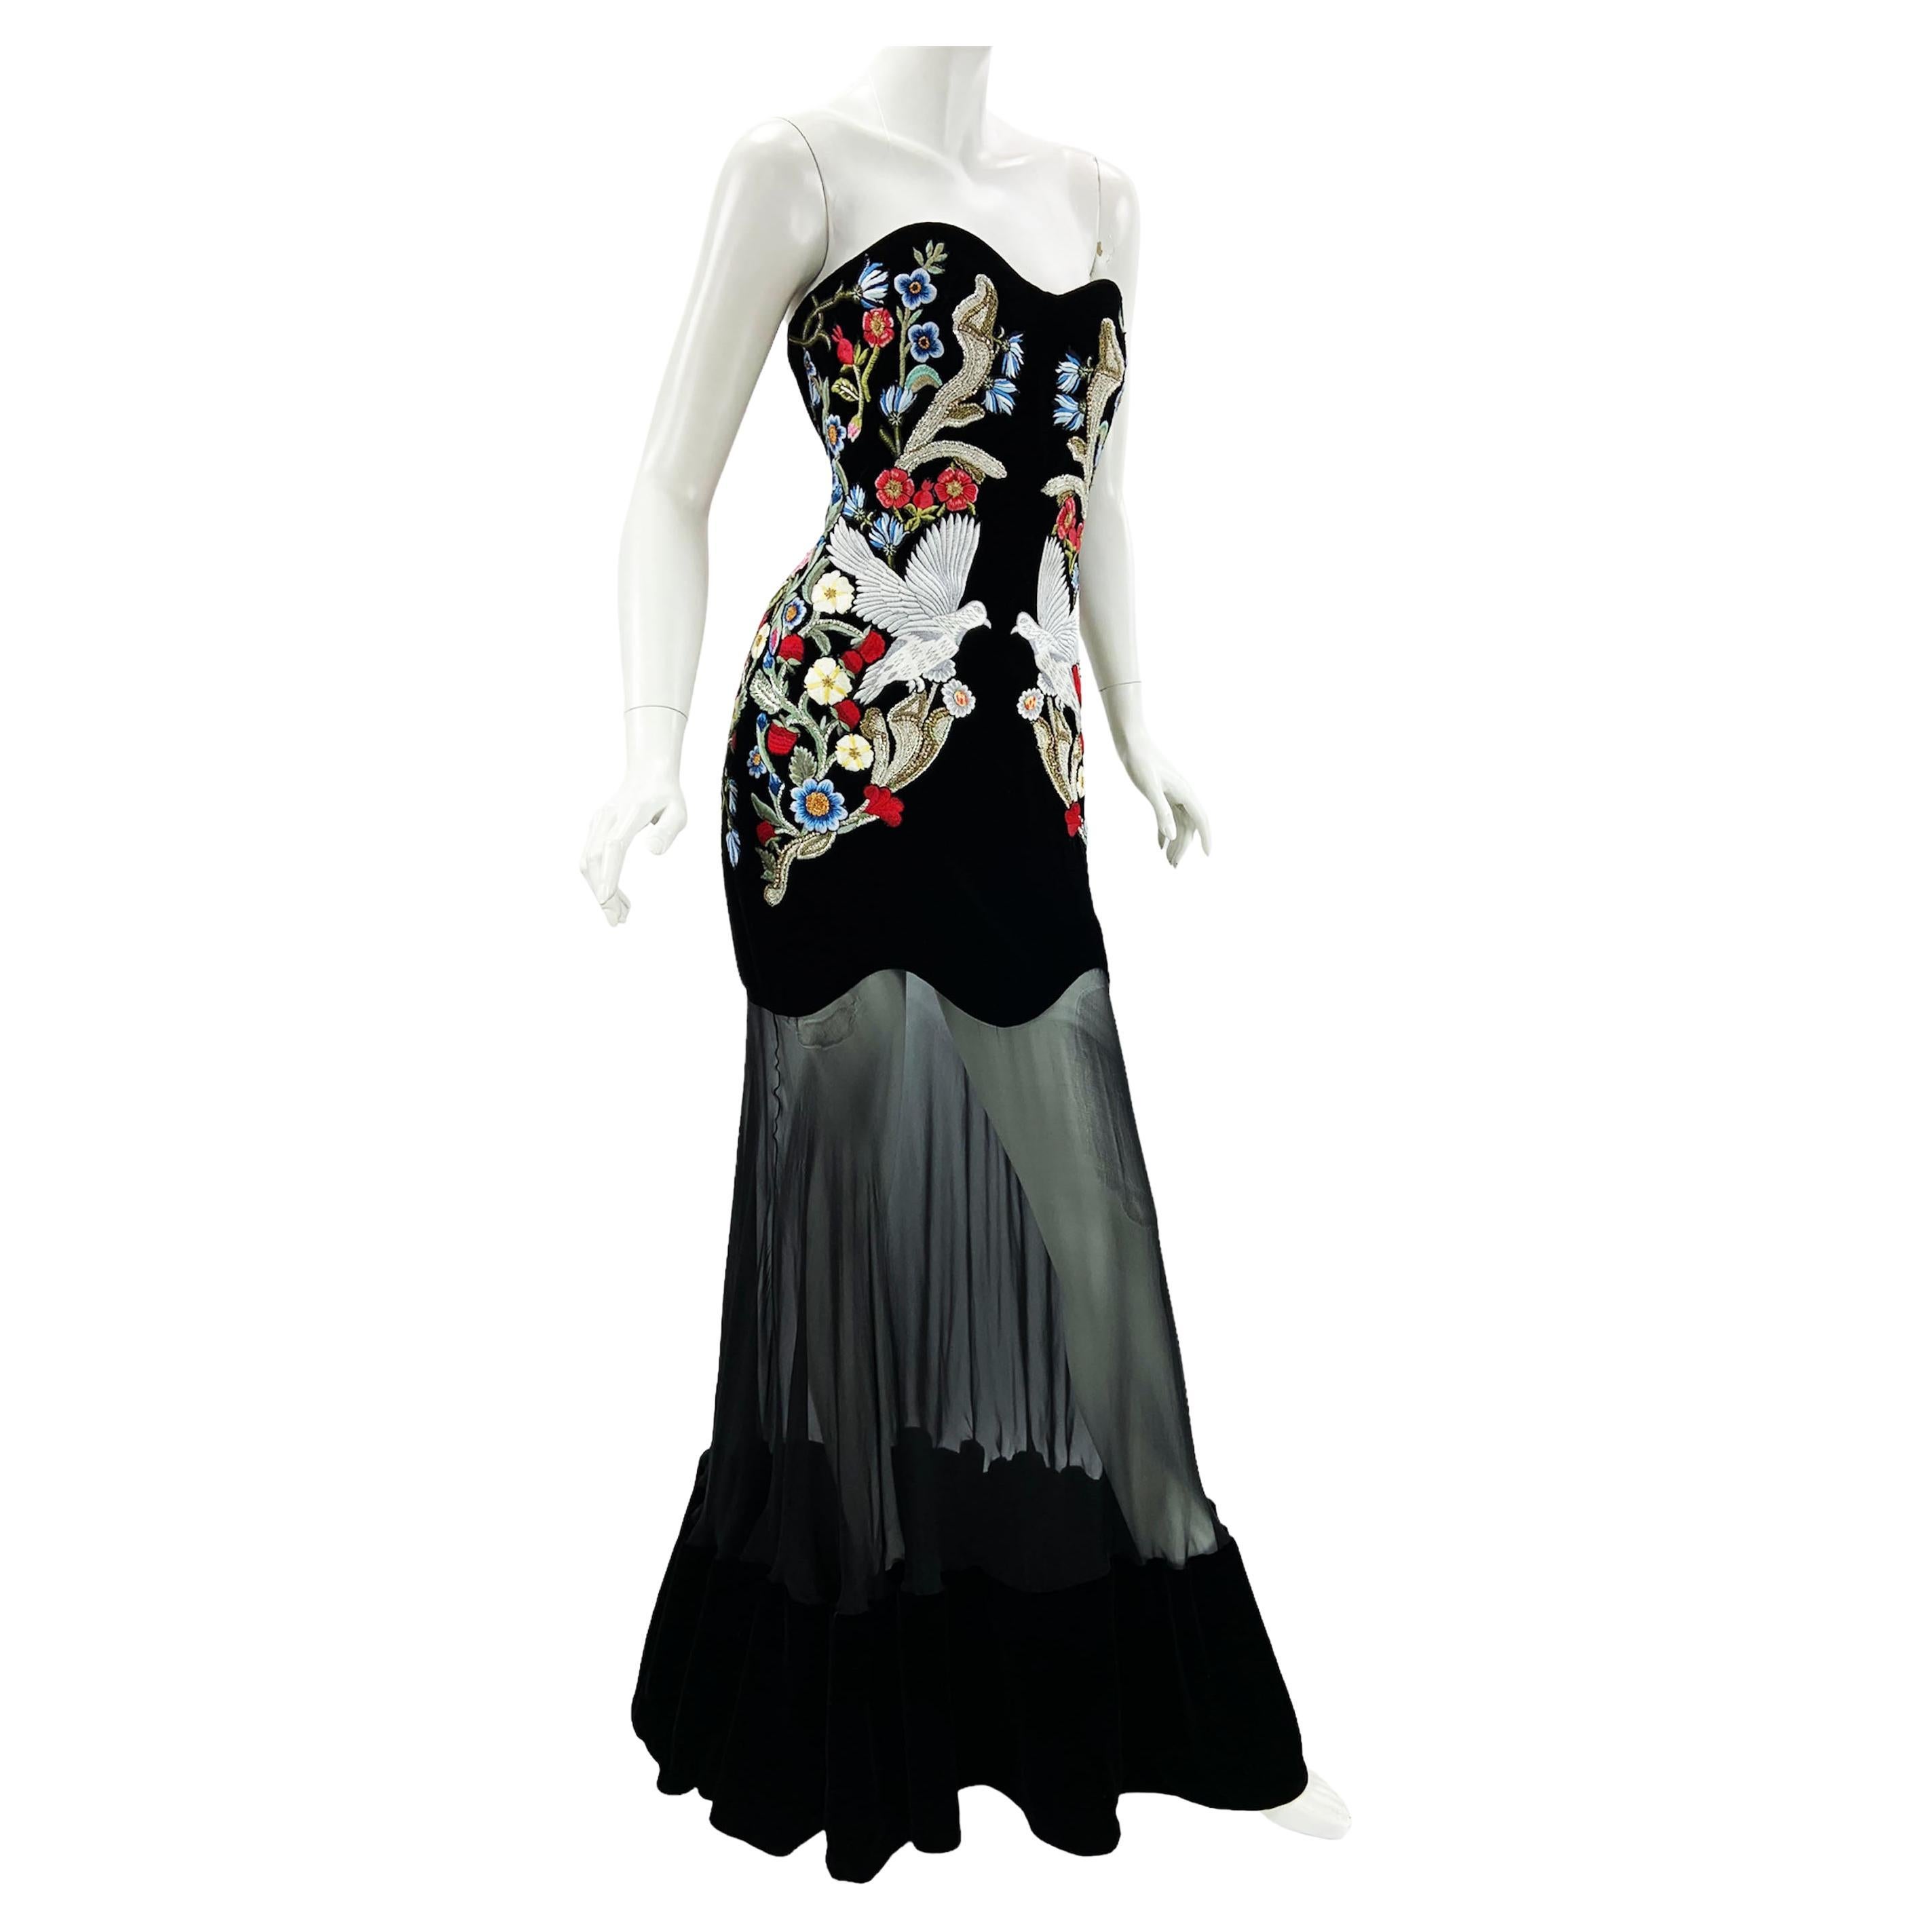 Alexander McQueen Black Velvet Chiffon Medieval Embroidery Corset Dress Gown 42 For Sale